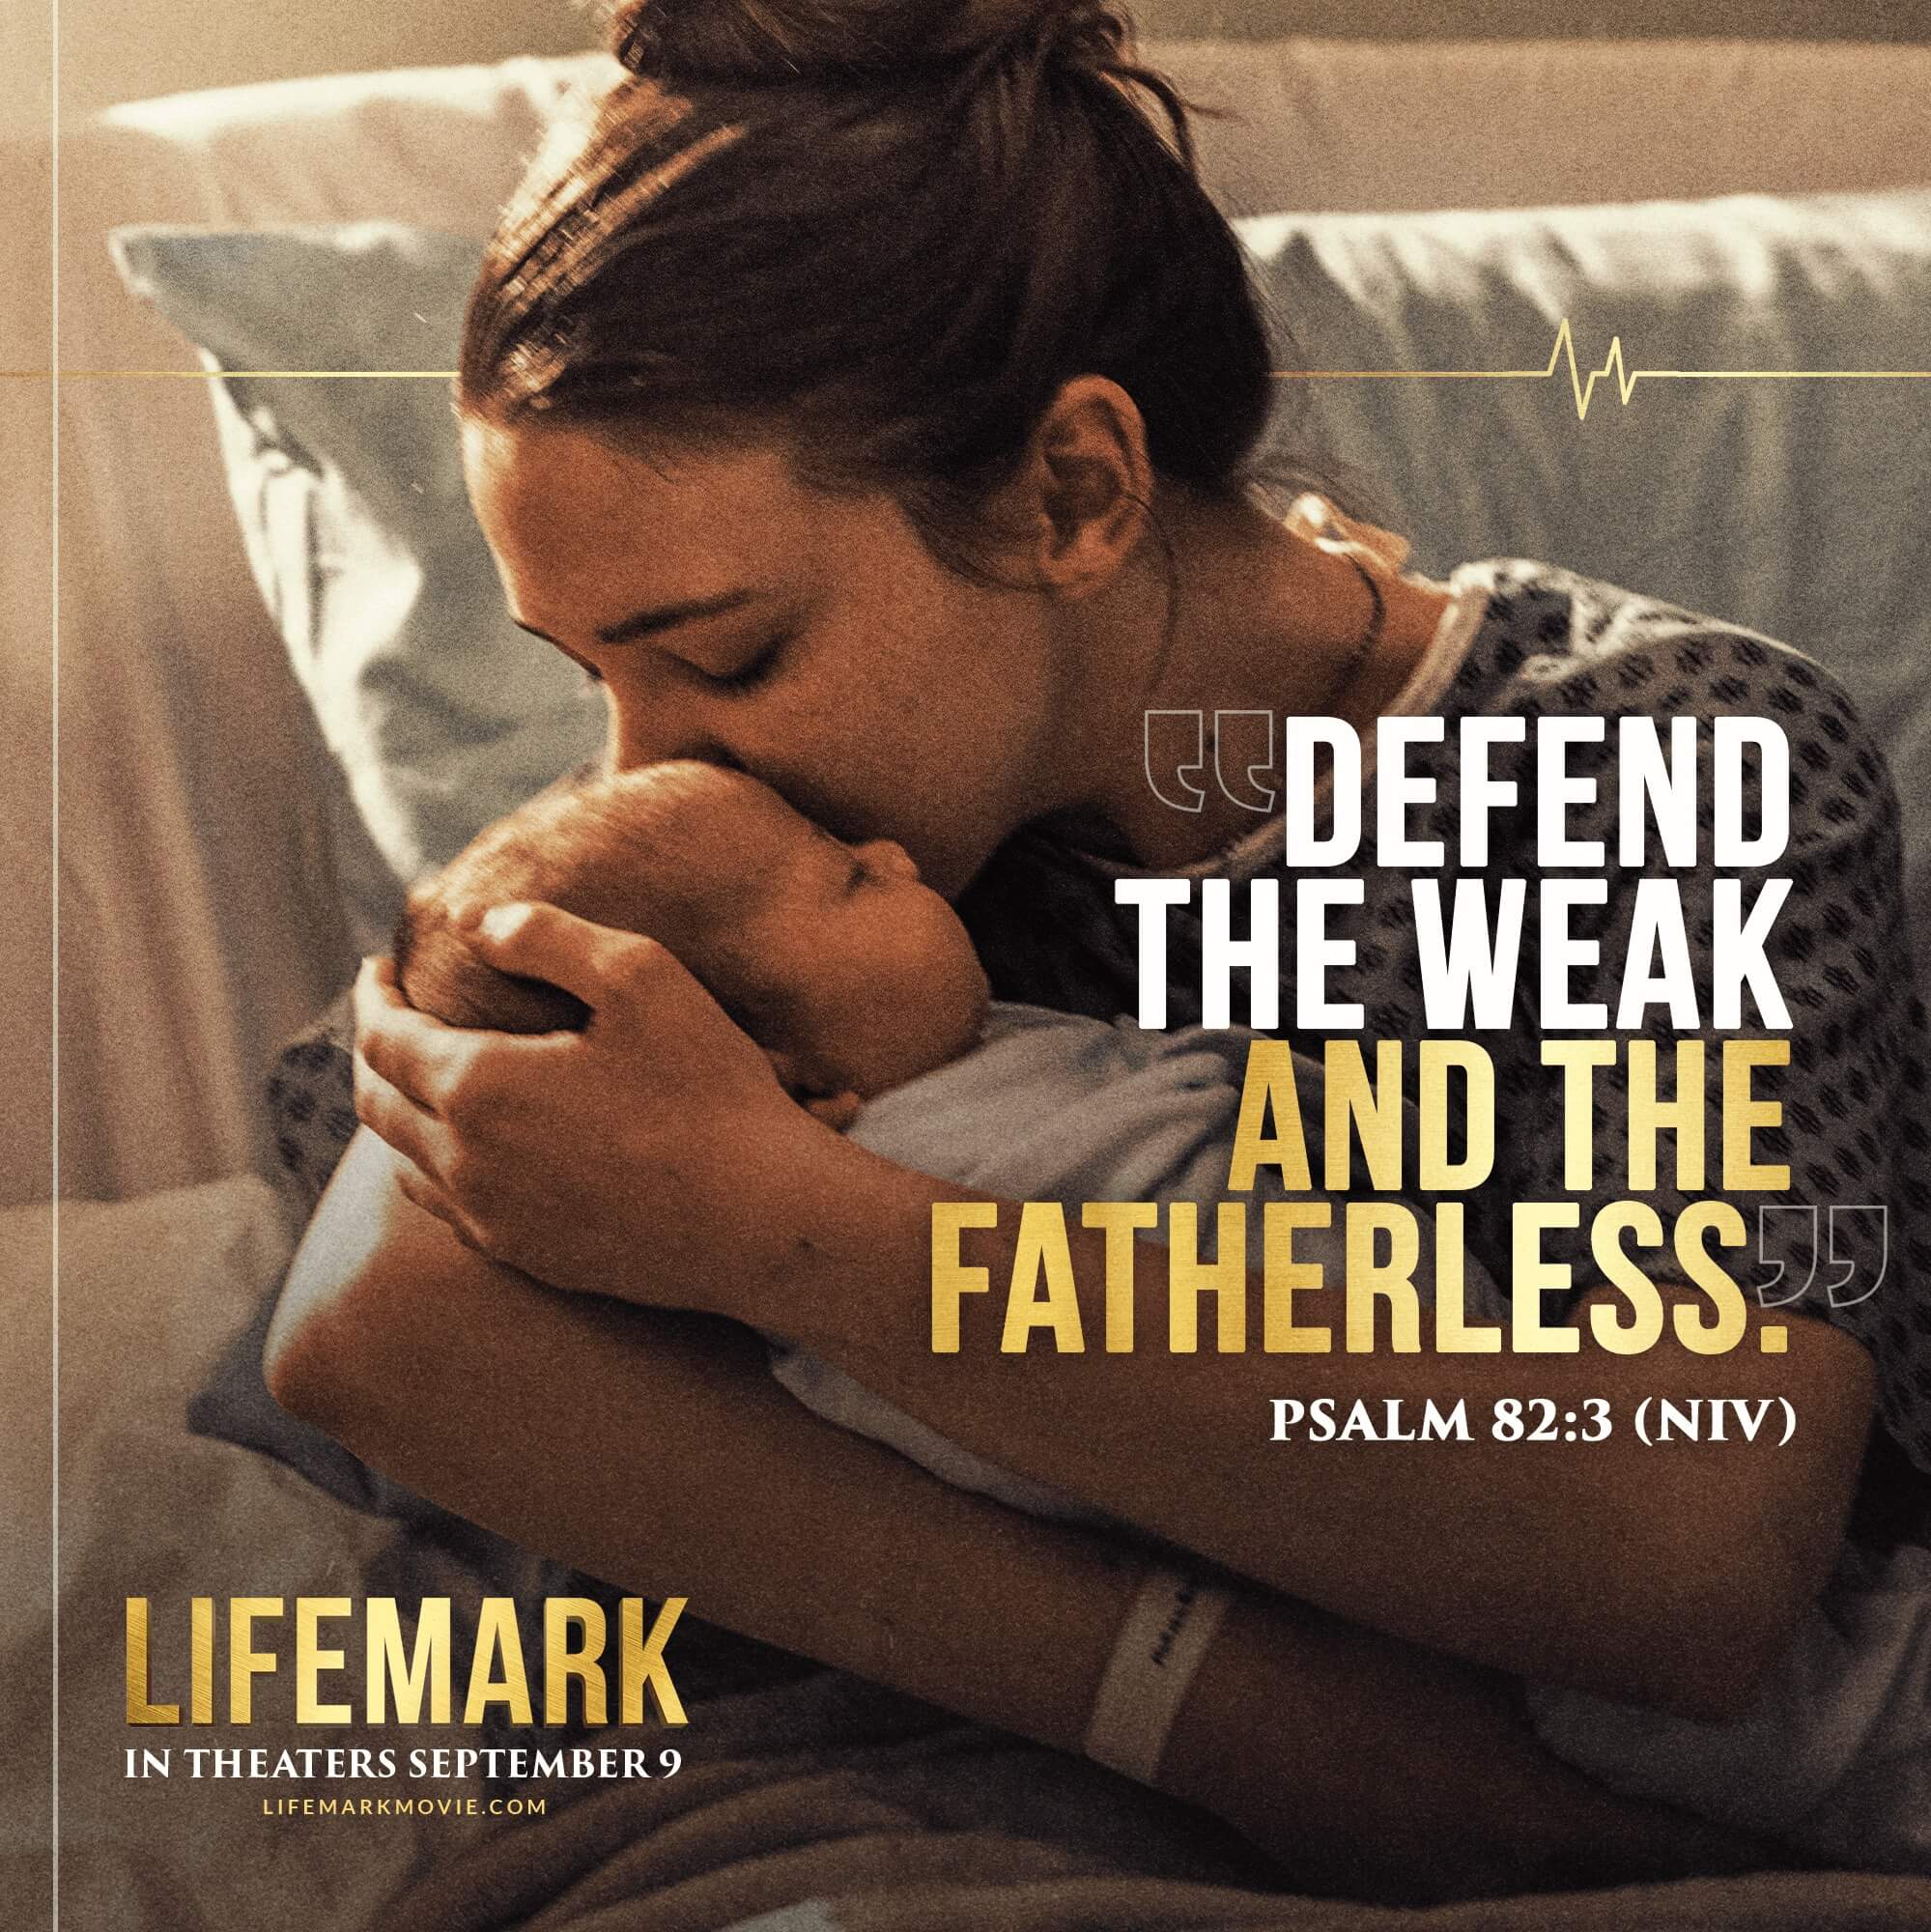 Kirk Cameron's New Film "Lifemark" Releasing With Almost Prophetic Accuracy